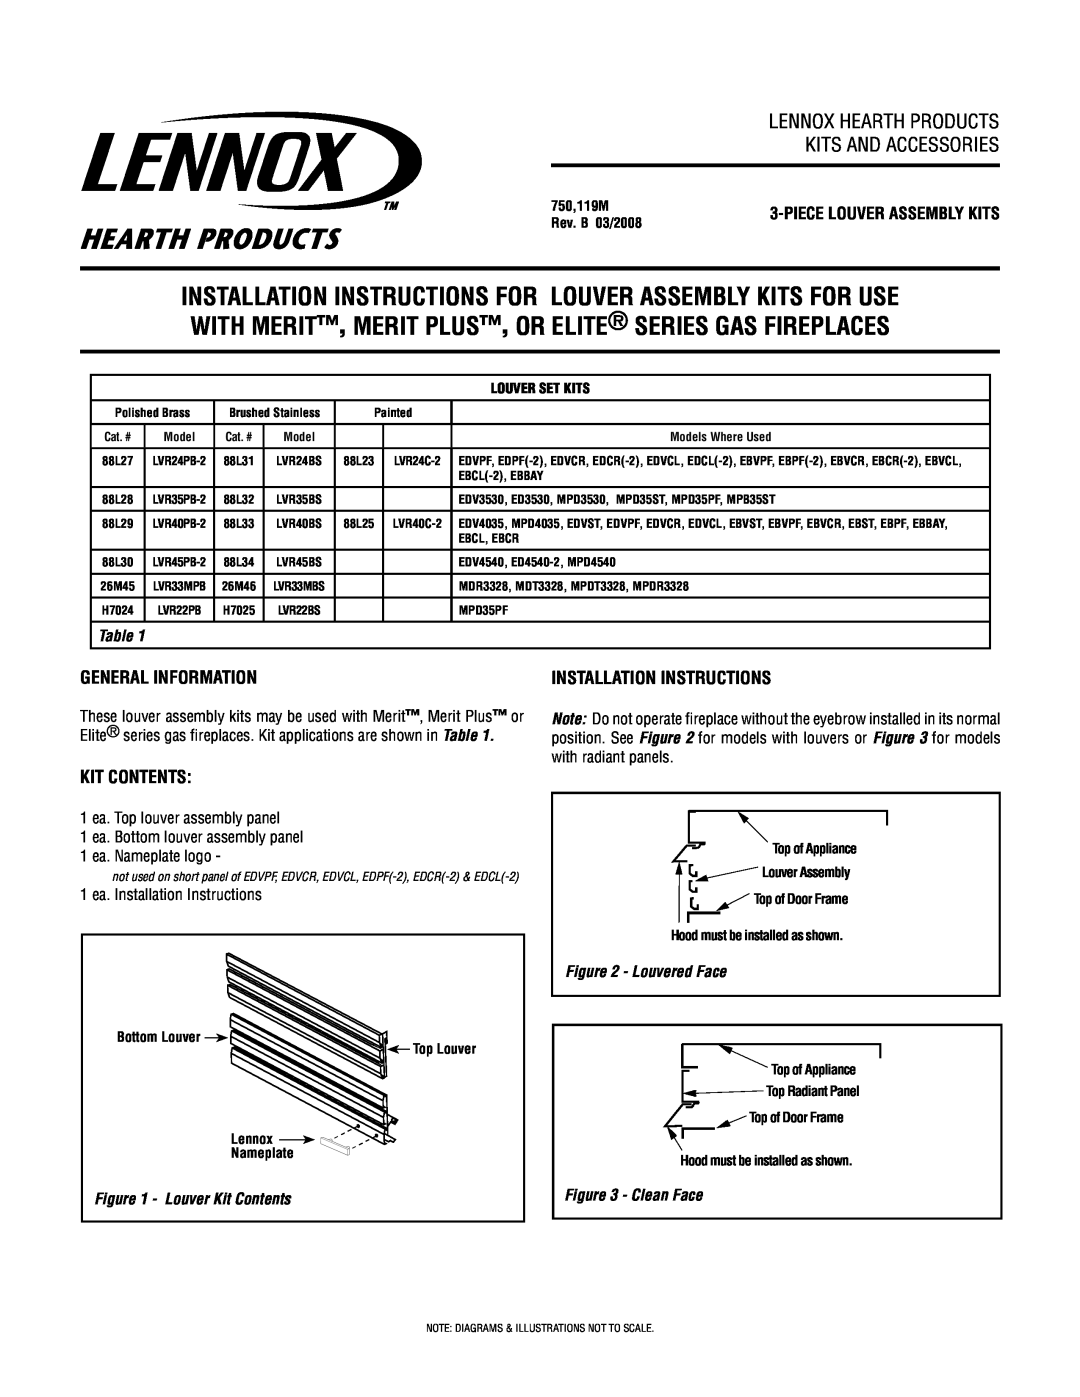 Lennox Hearth 3-Piece Louver Kit installation instructions Lennox Hearth Products Kits And Accessories, Kit Contents 